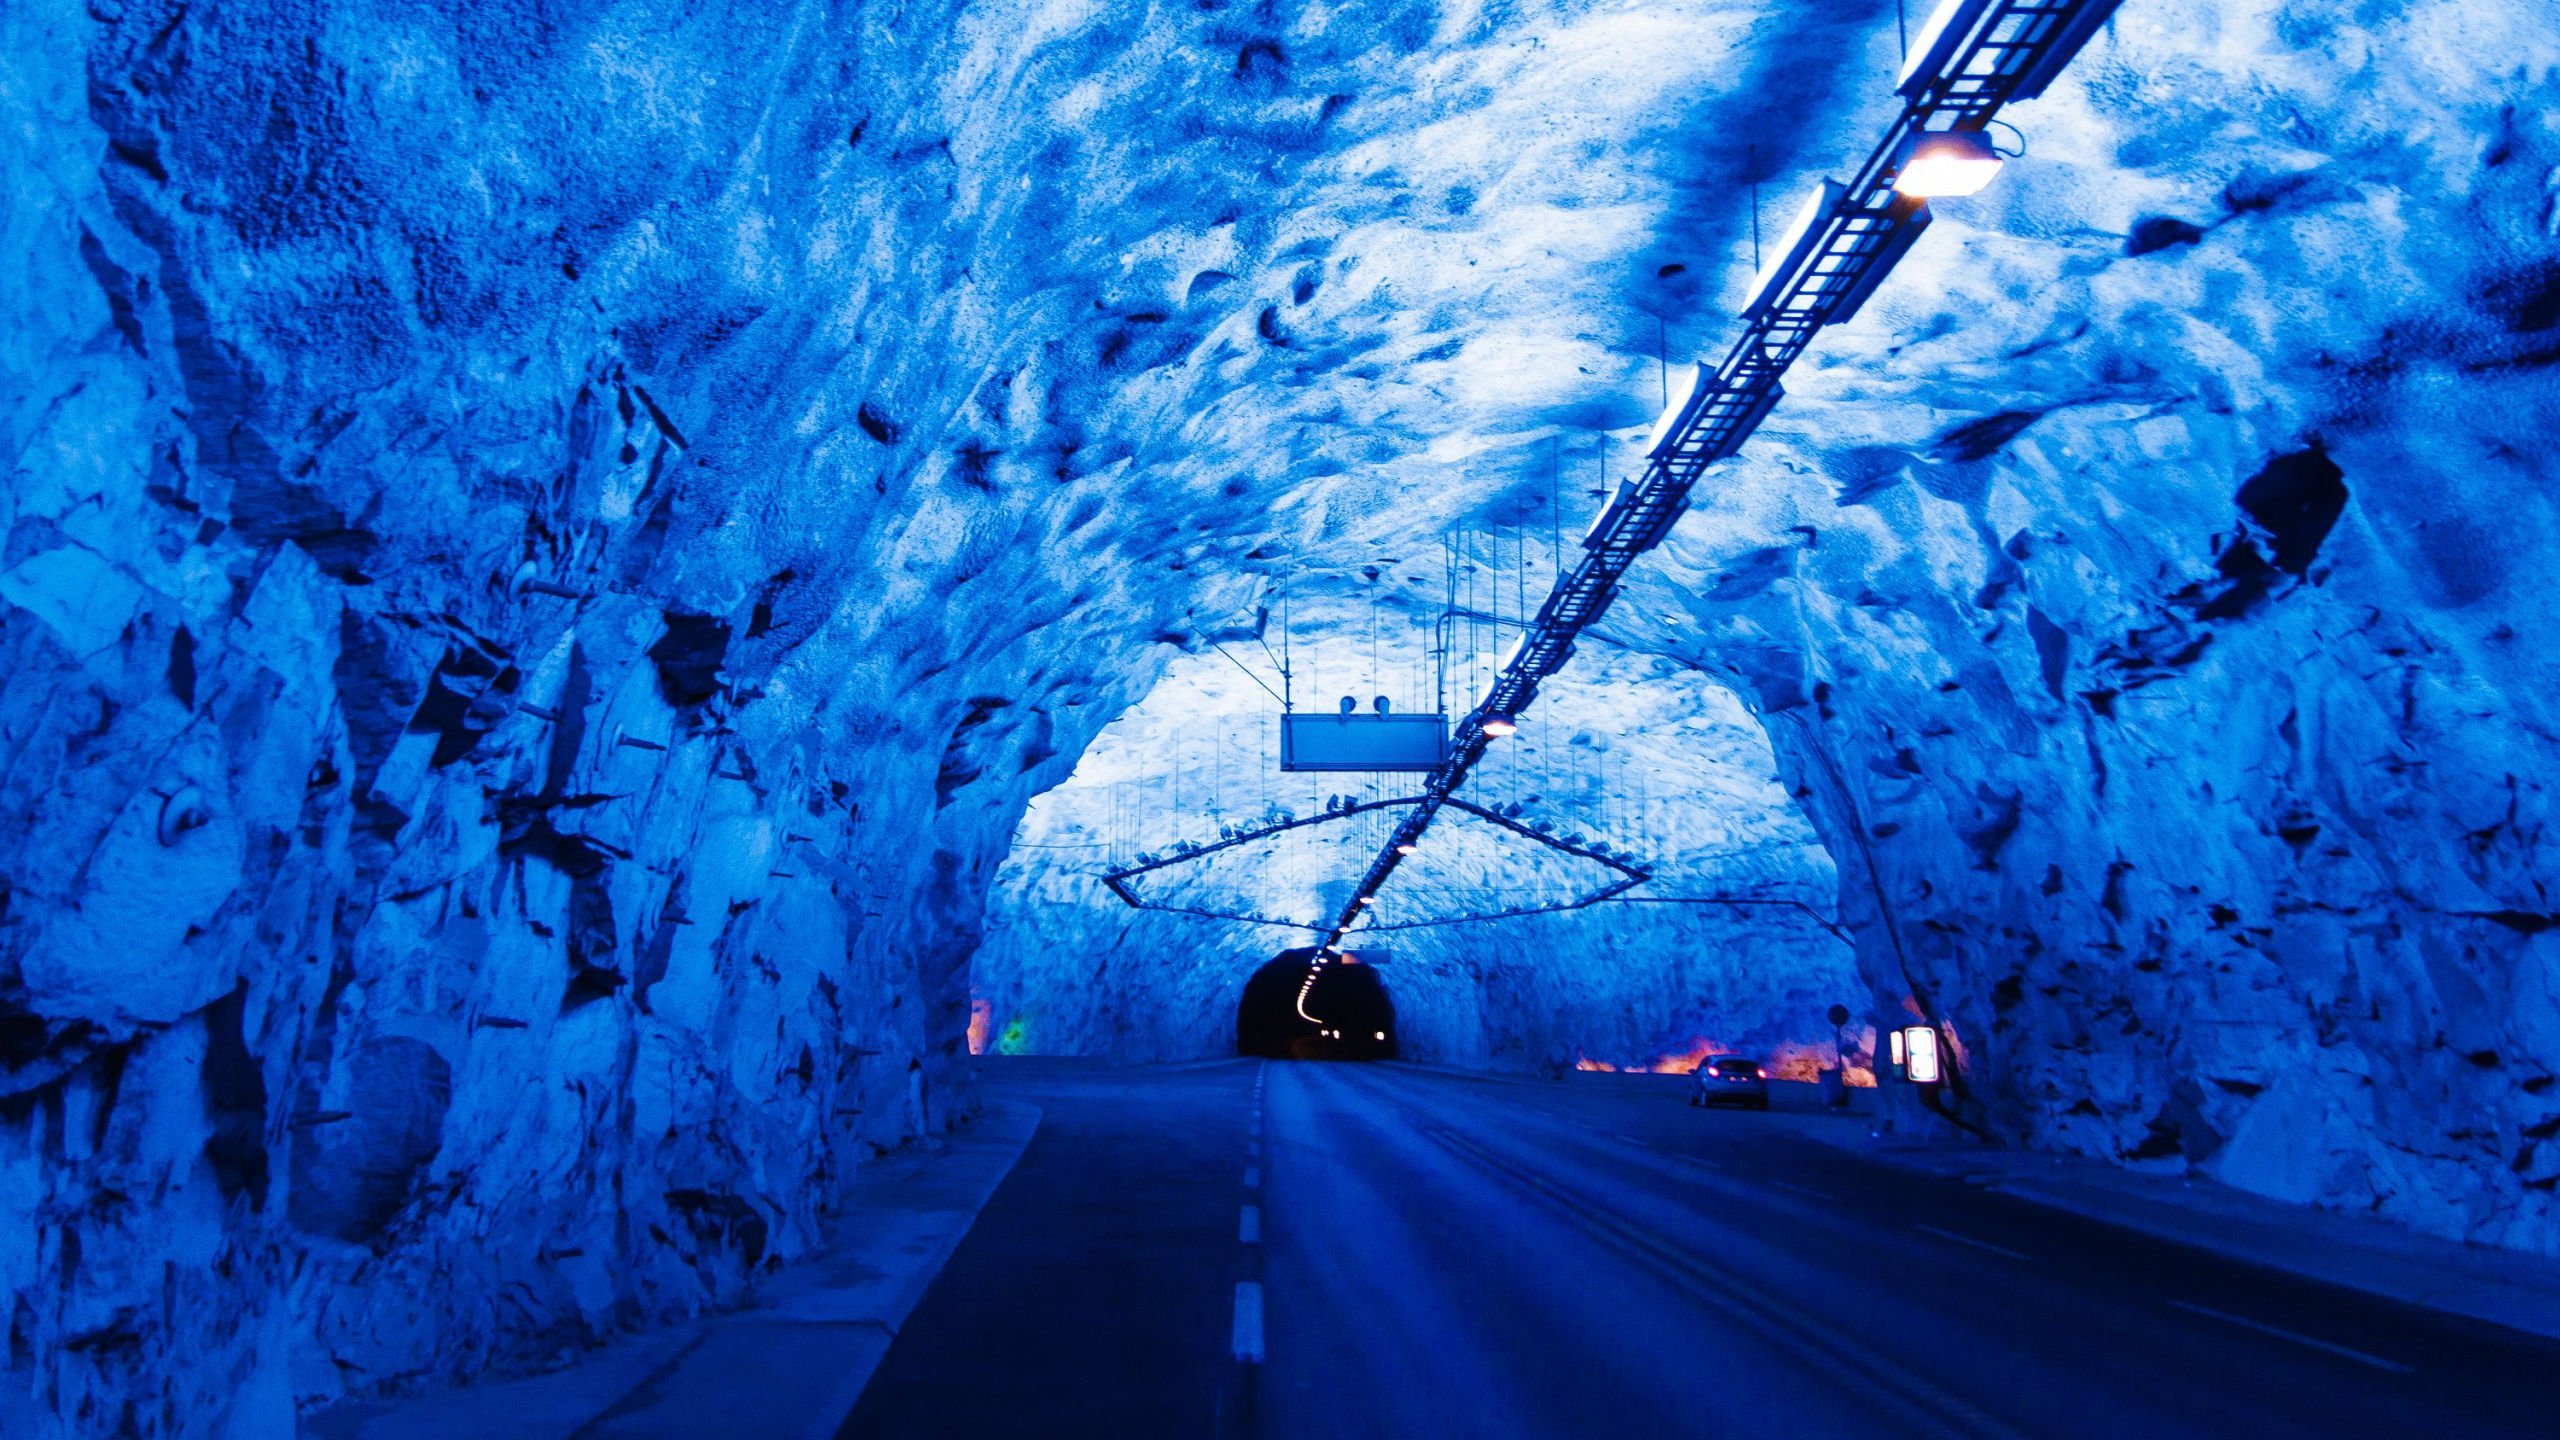 Inside the Lærdal tunnel in Norway.